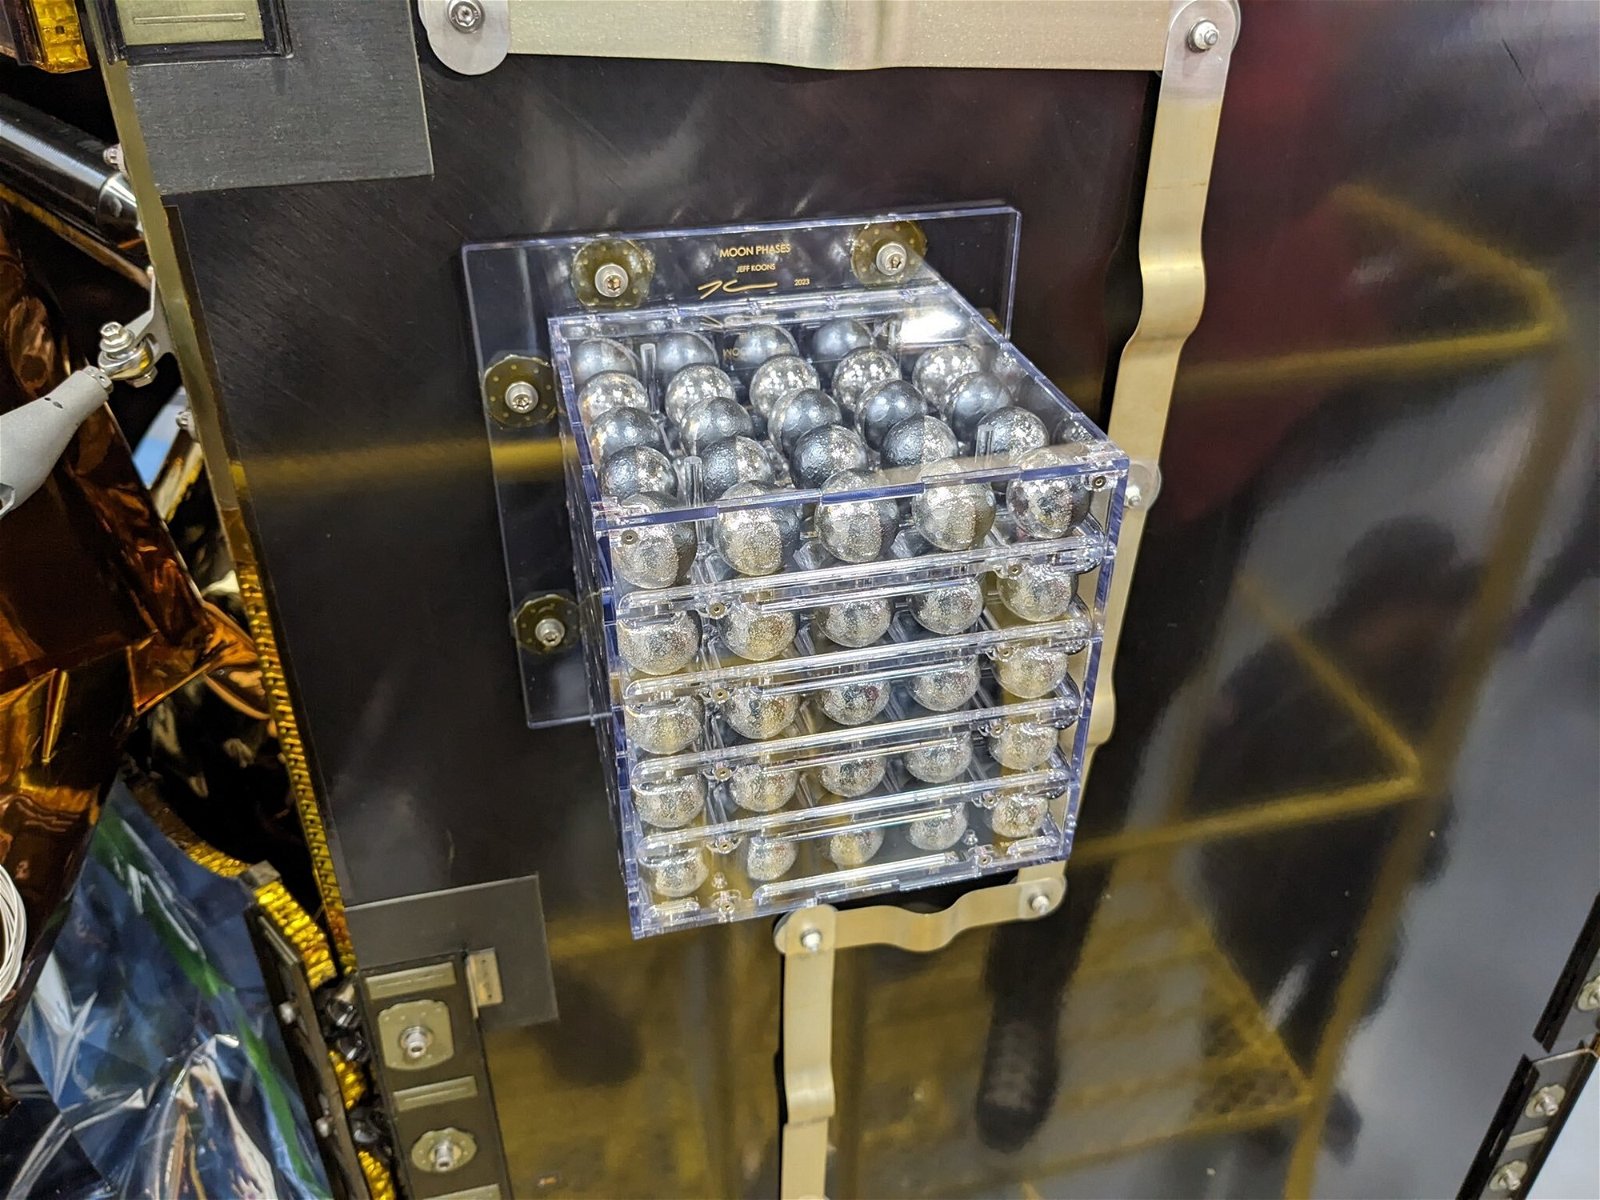 A group of small spheres in a clear box on the side of a spacecraft